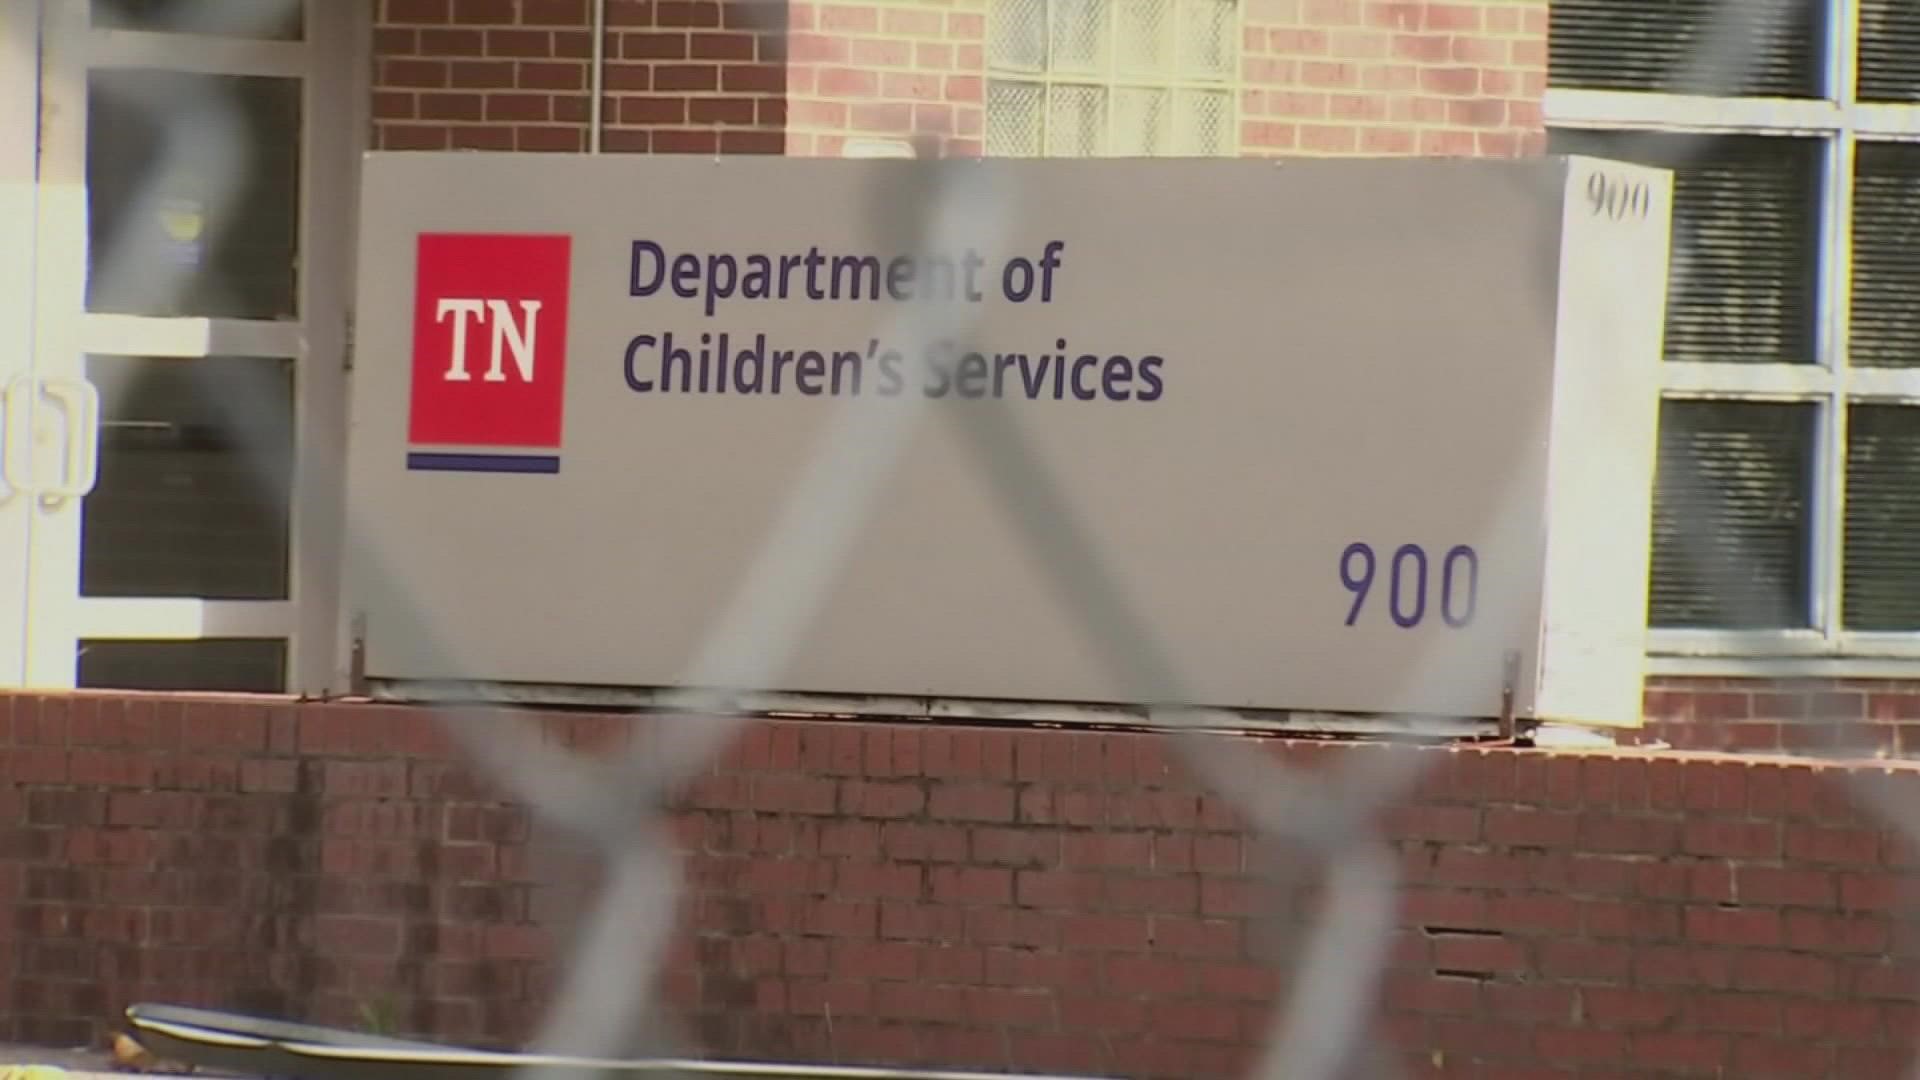 The audit went over issues plaguing DCS, saying there are "crisis-level" staffing and placement shortages that could be putting kids in need at severe risk.